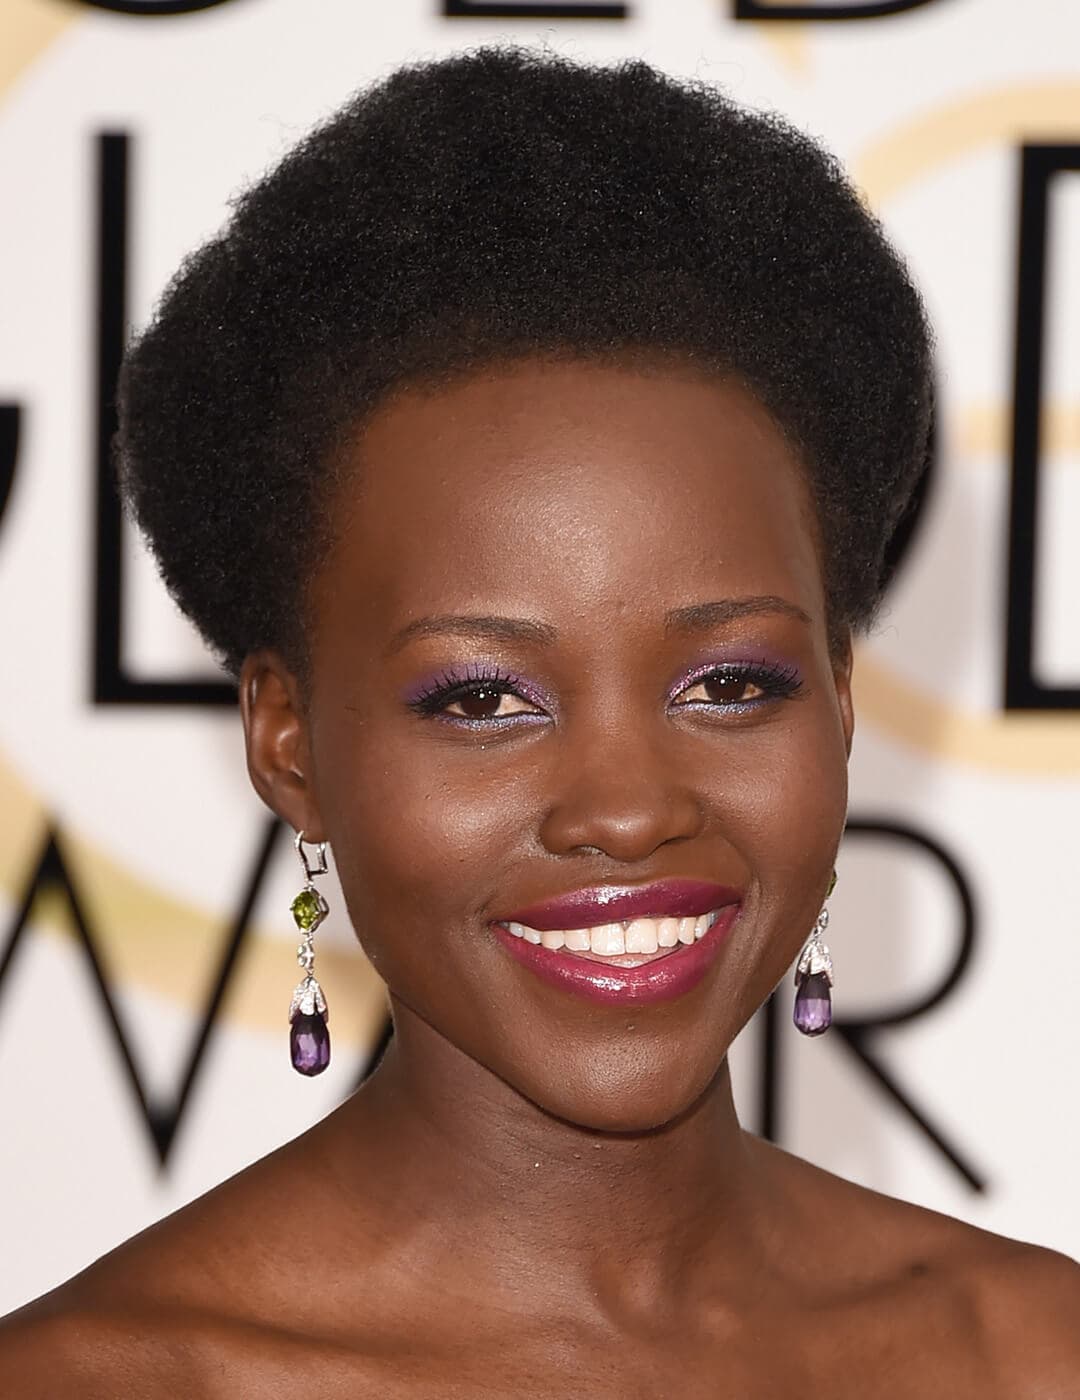 Actress Lupita Nyong'o attends the 72nd Annual Golden Globe Awards at The Beverly Hilton Hotel on January 11, 2015 in Beverly Hills, California.